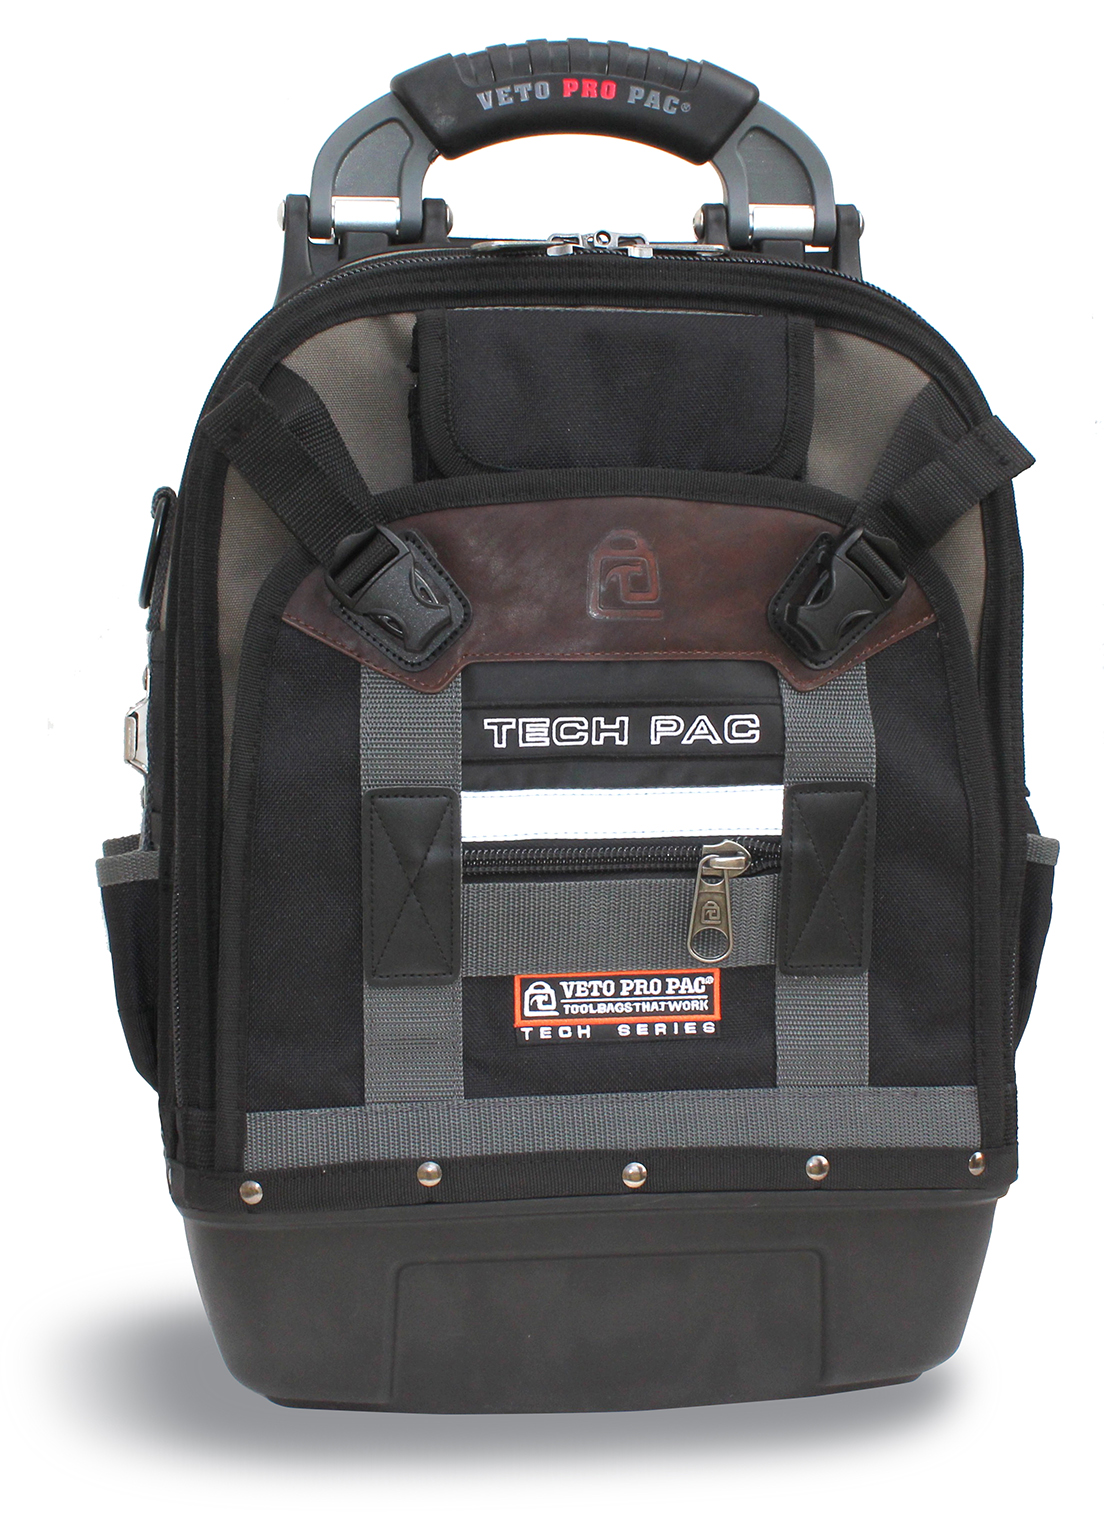 Veto Pro Pac Tech LC Tool Bag Load Out and Review 